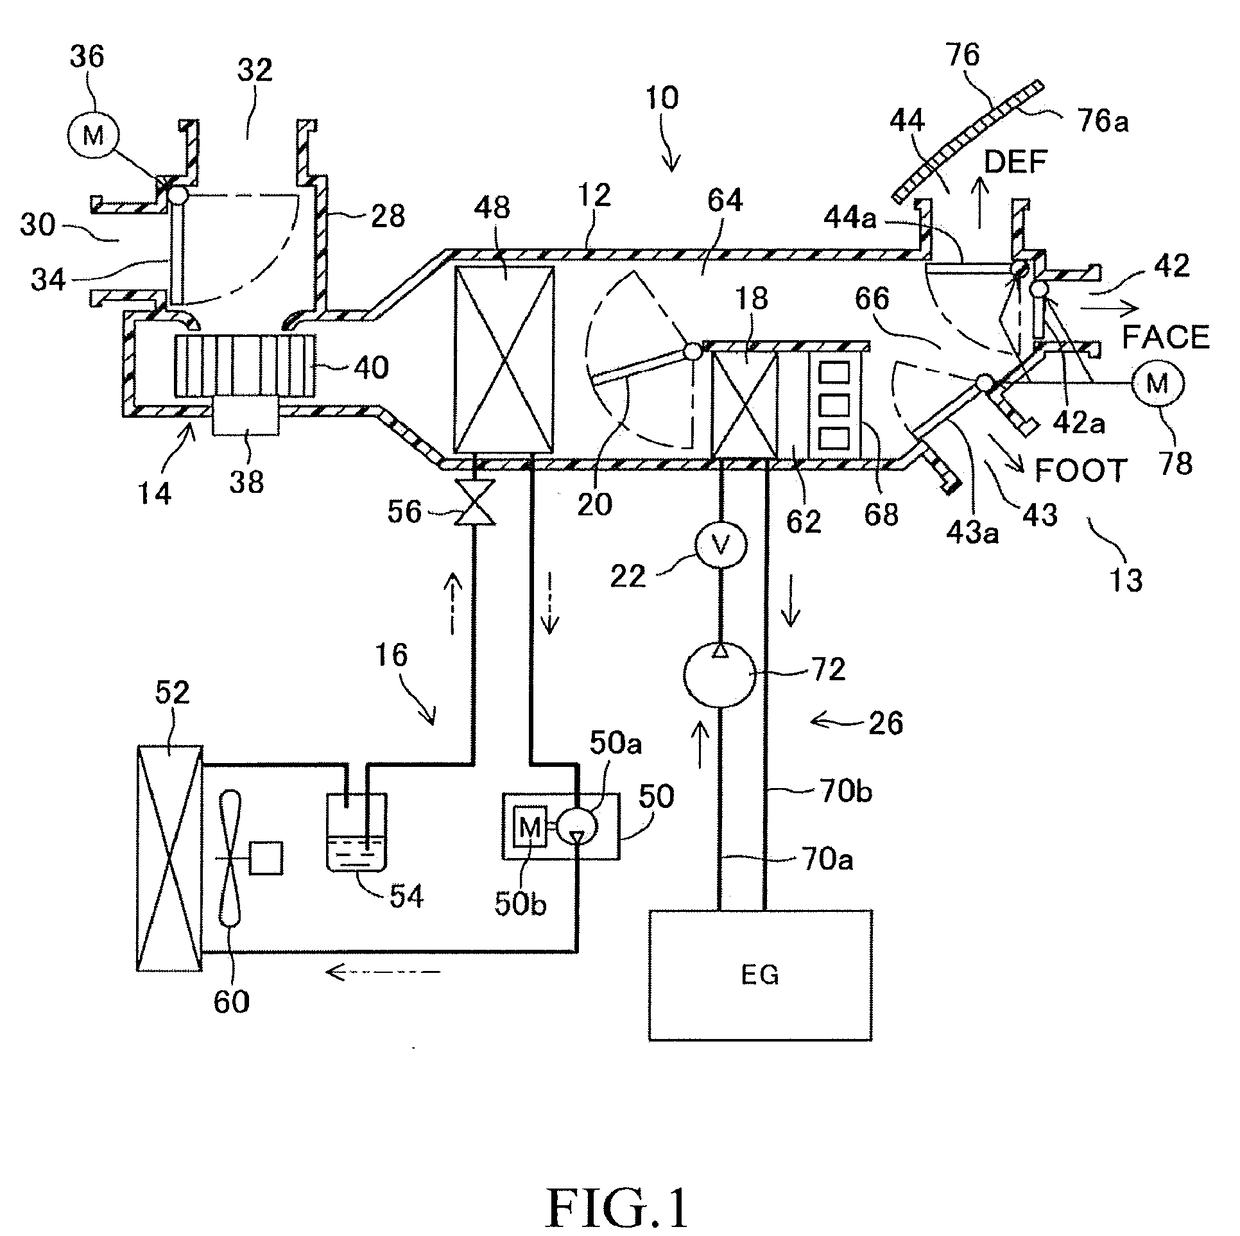 Air-conditioning device for vehicle